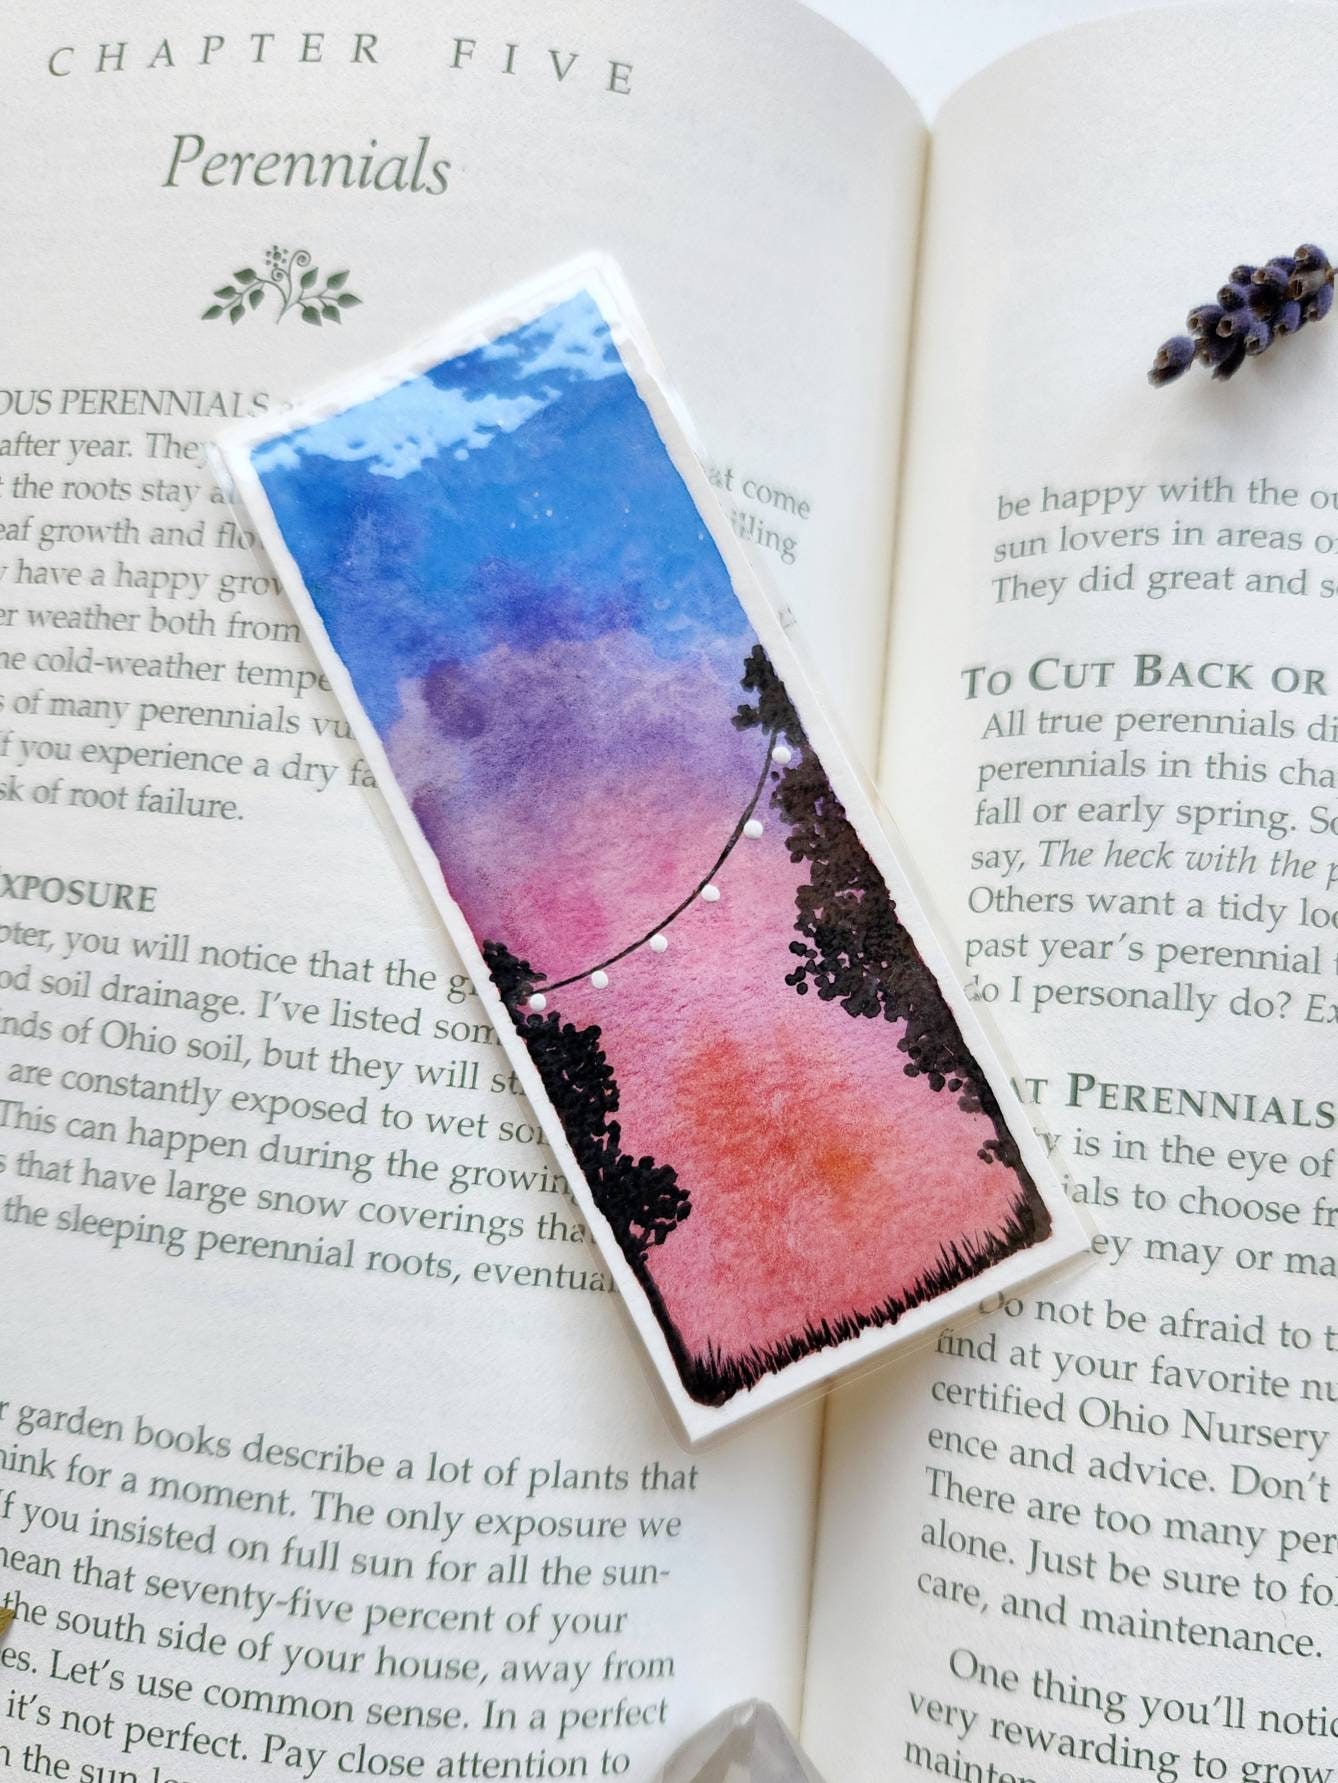 Where bookish things happen  Diy bookmarks, Watercolor bookmarks,  Bookmarks handmade